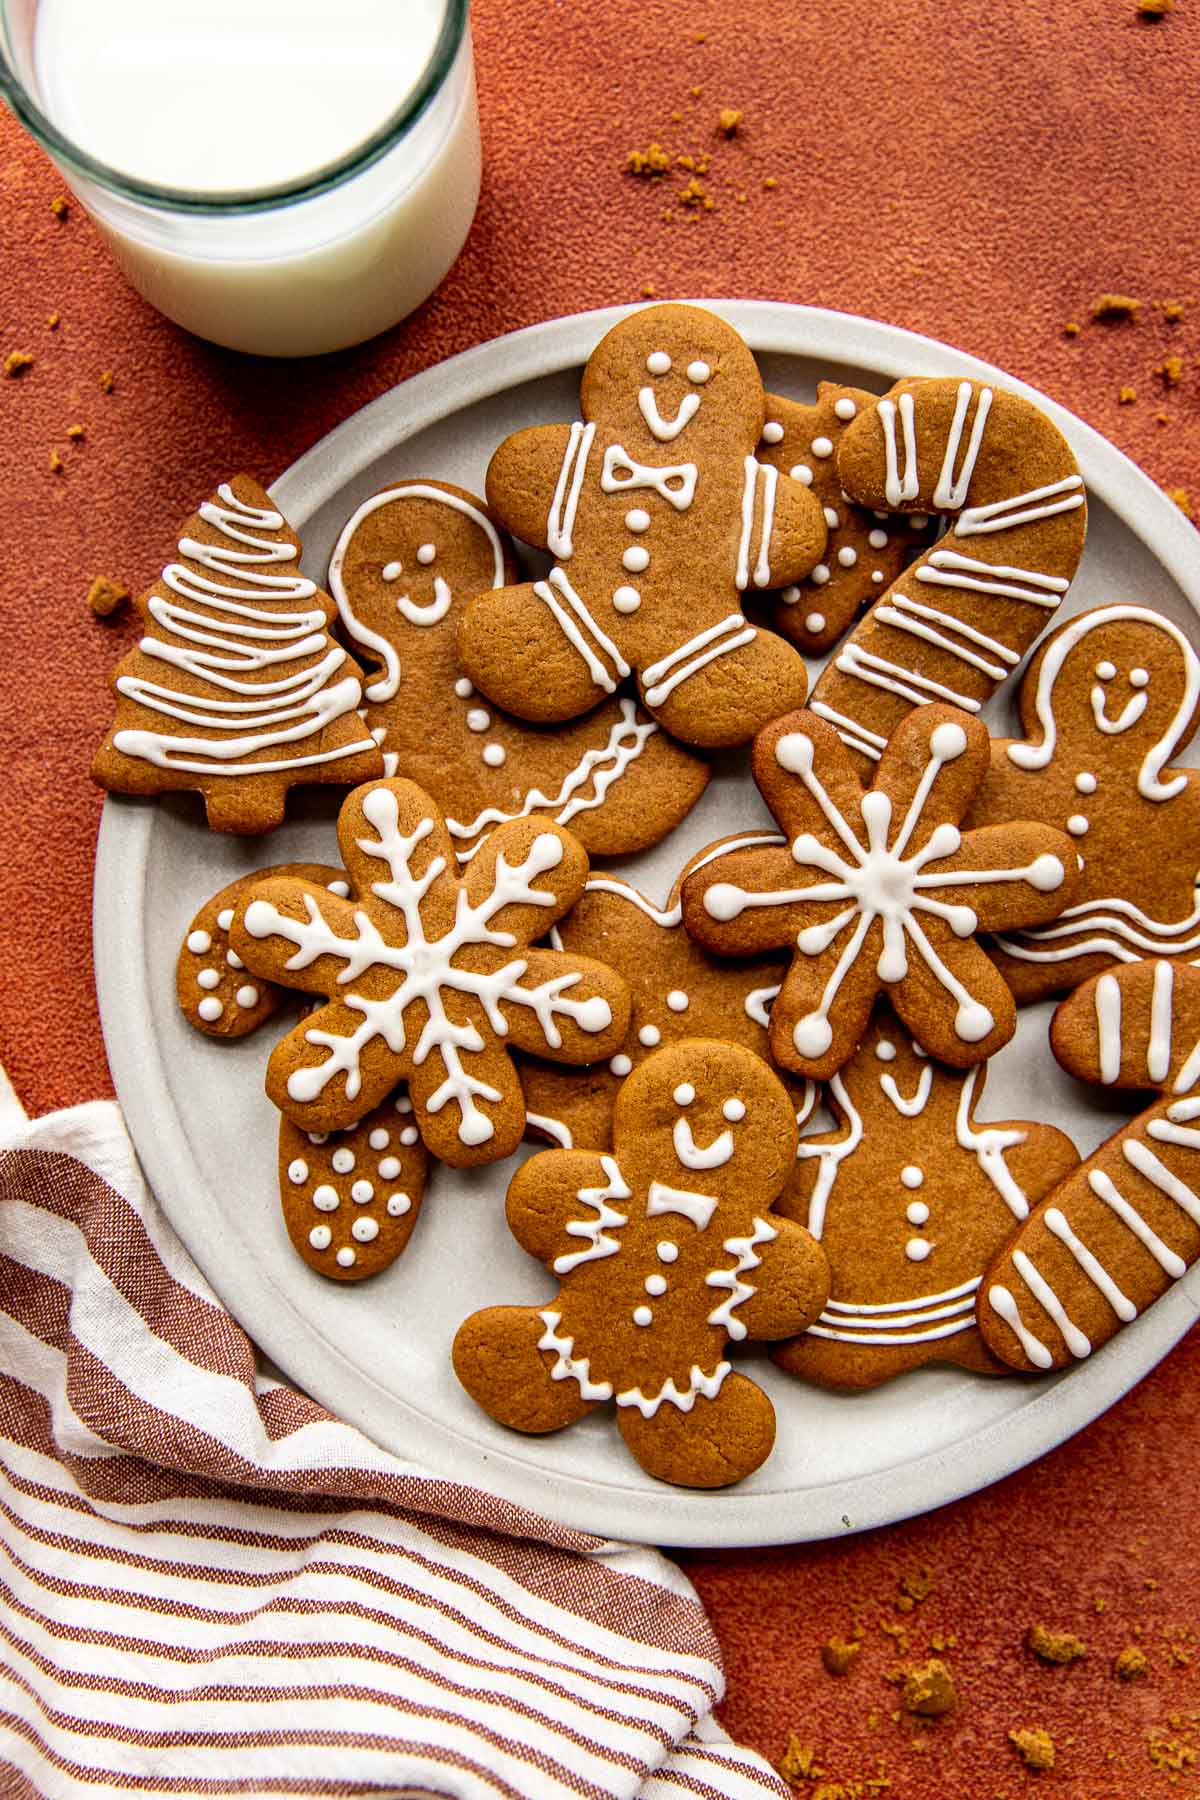 snowflake, tree, candy cane, and gingerbread men cookies with white icing on a white circle plate